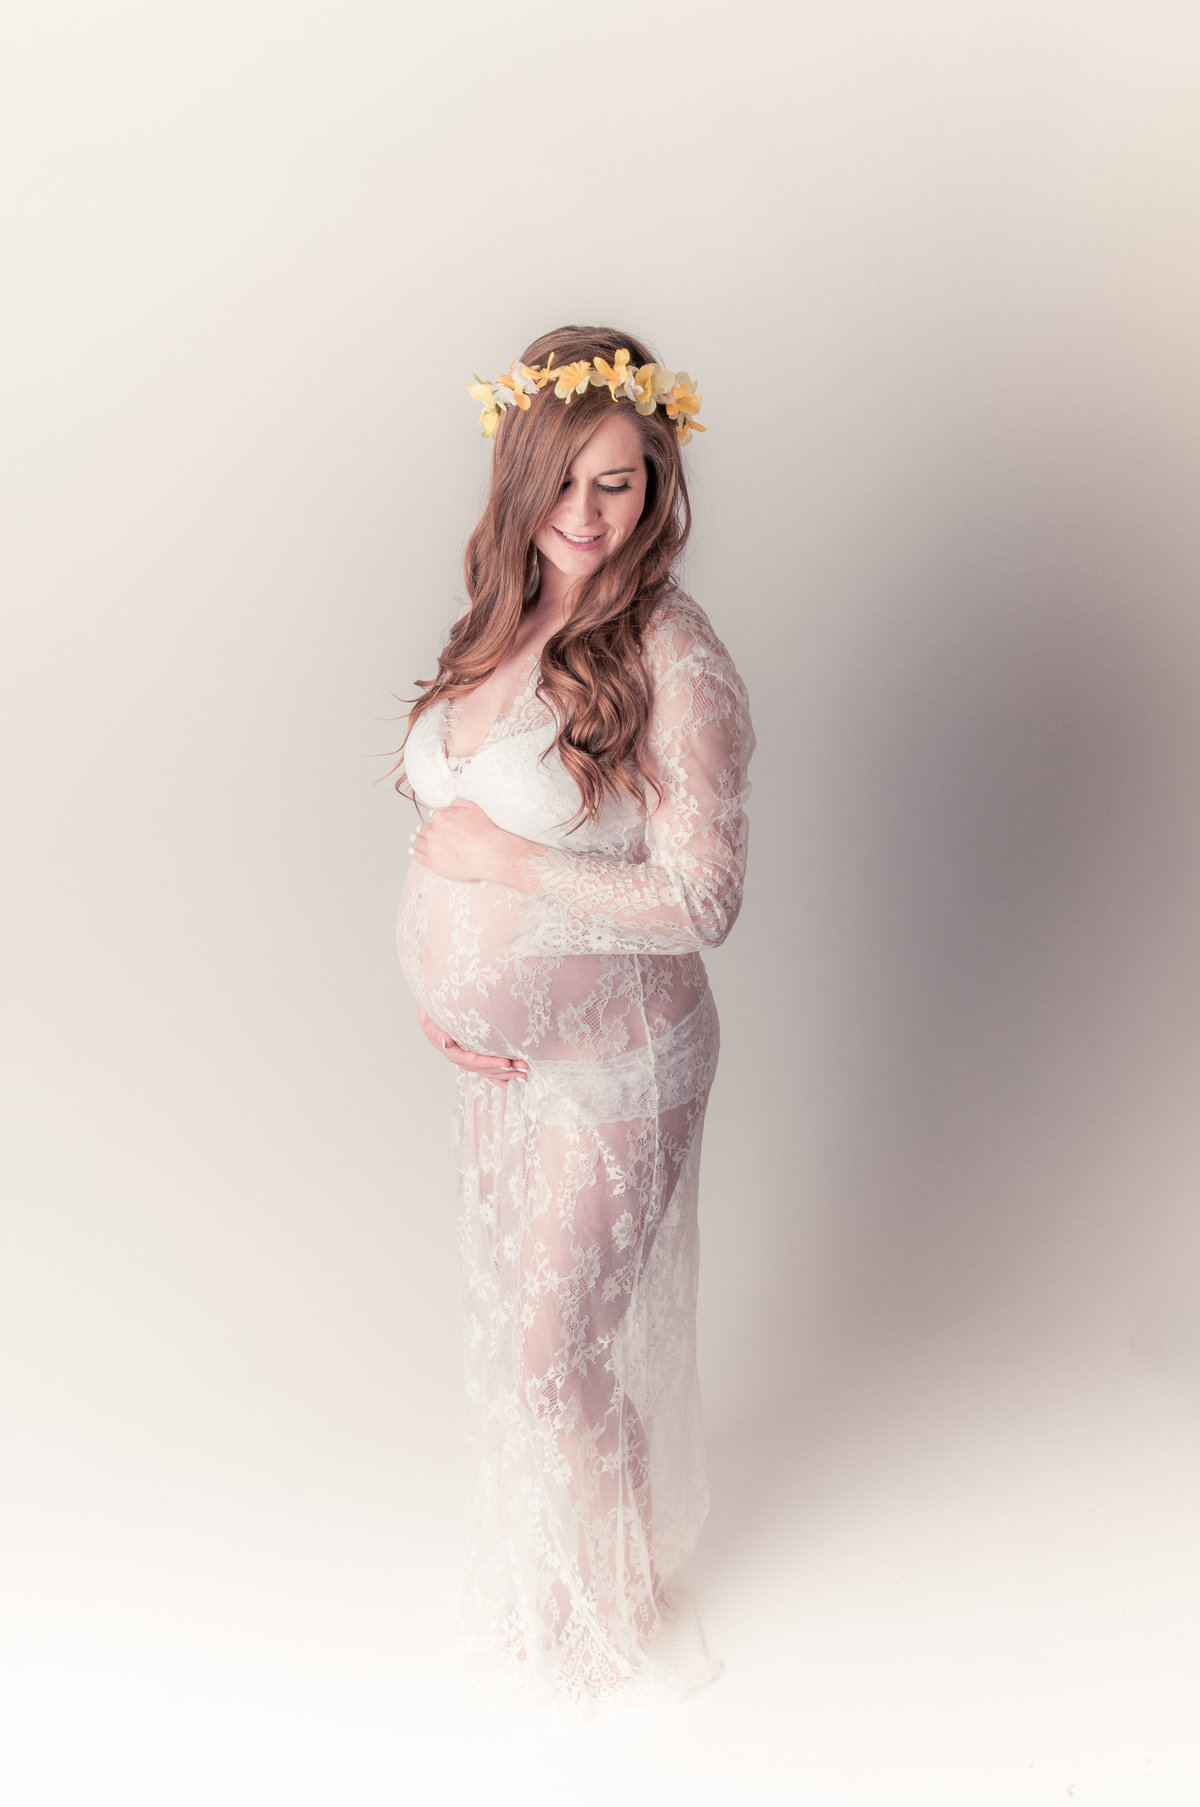 Woman poses for maternity photoshoot in Southern California | One Shot Beyond Photography